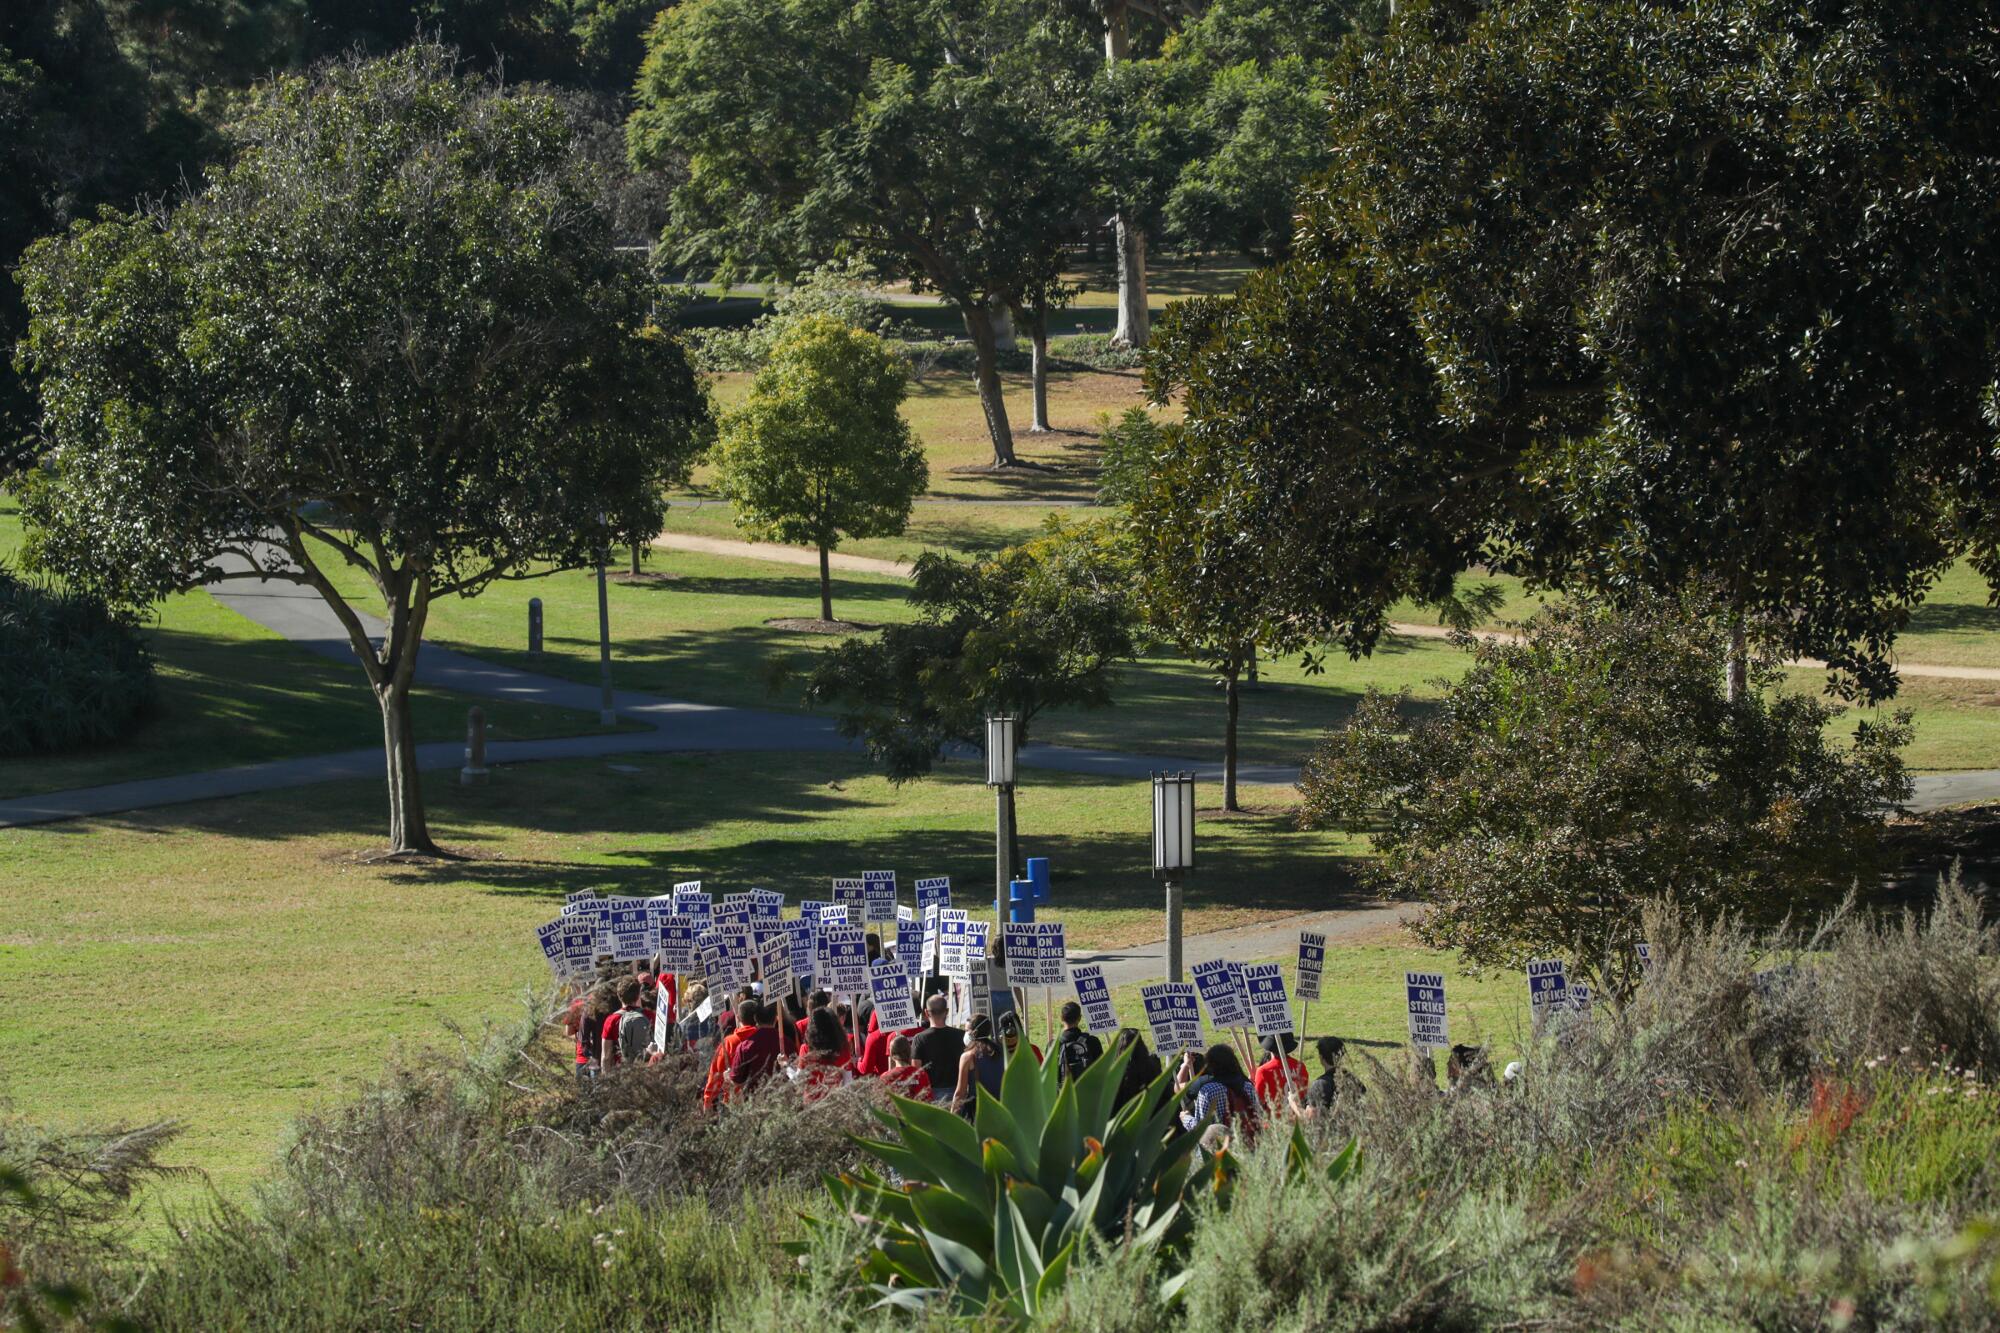 A group of demonstrators with signs walk through a green and leafy area at UCI